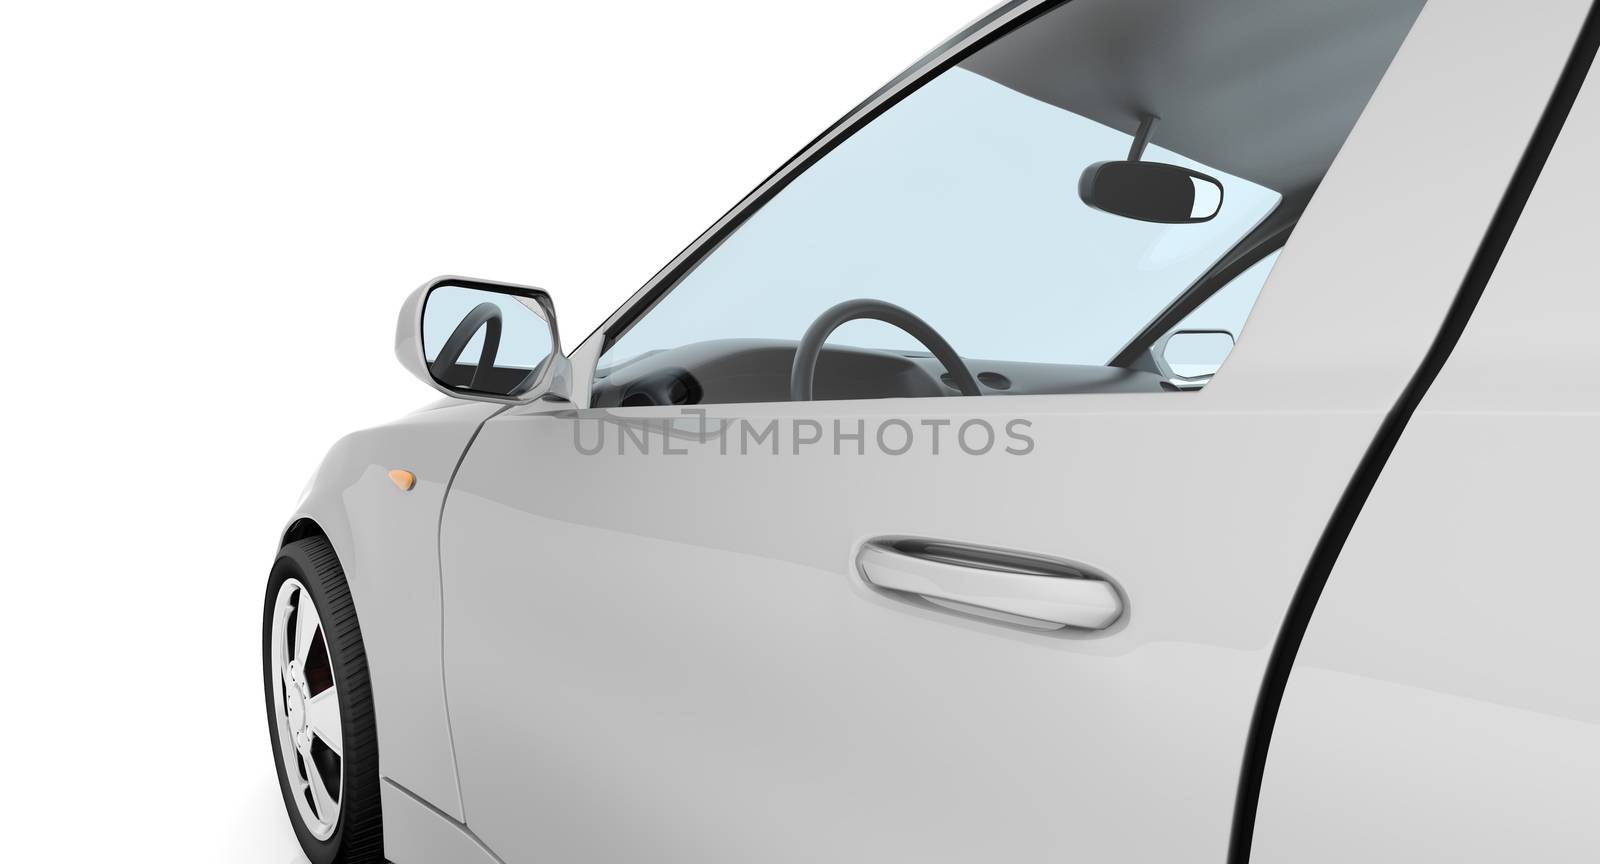 White car on isolated white background, close-up view of door